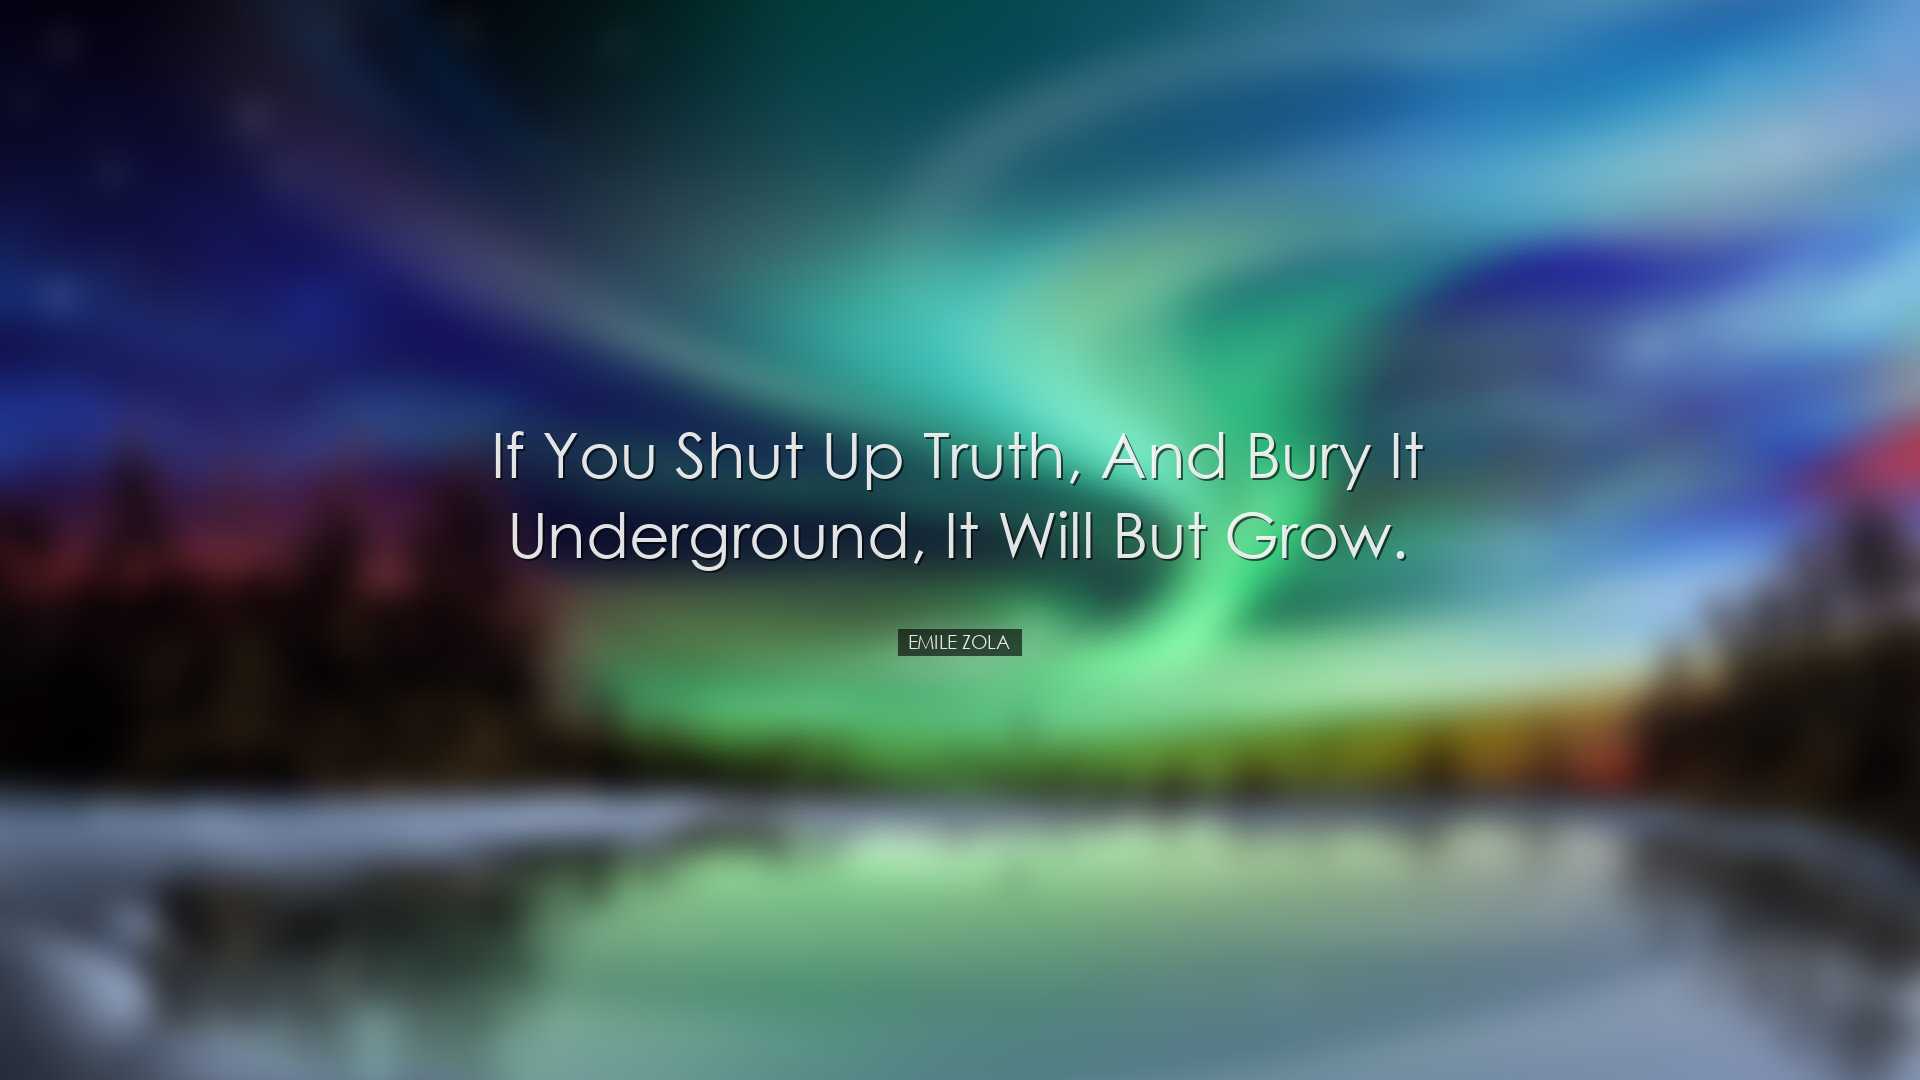 If you shut up truth, and bury it underground, it will but grow. -